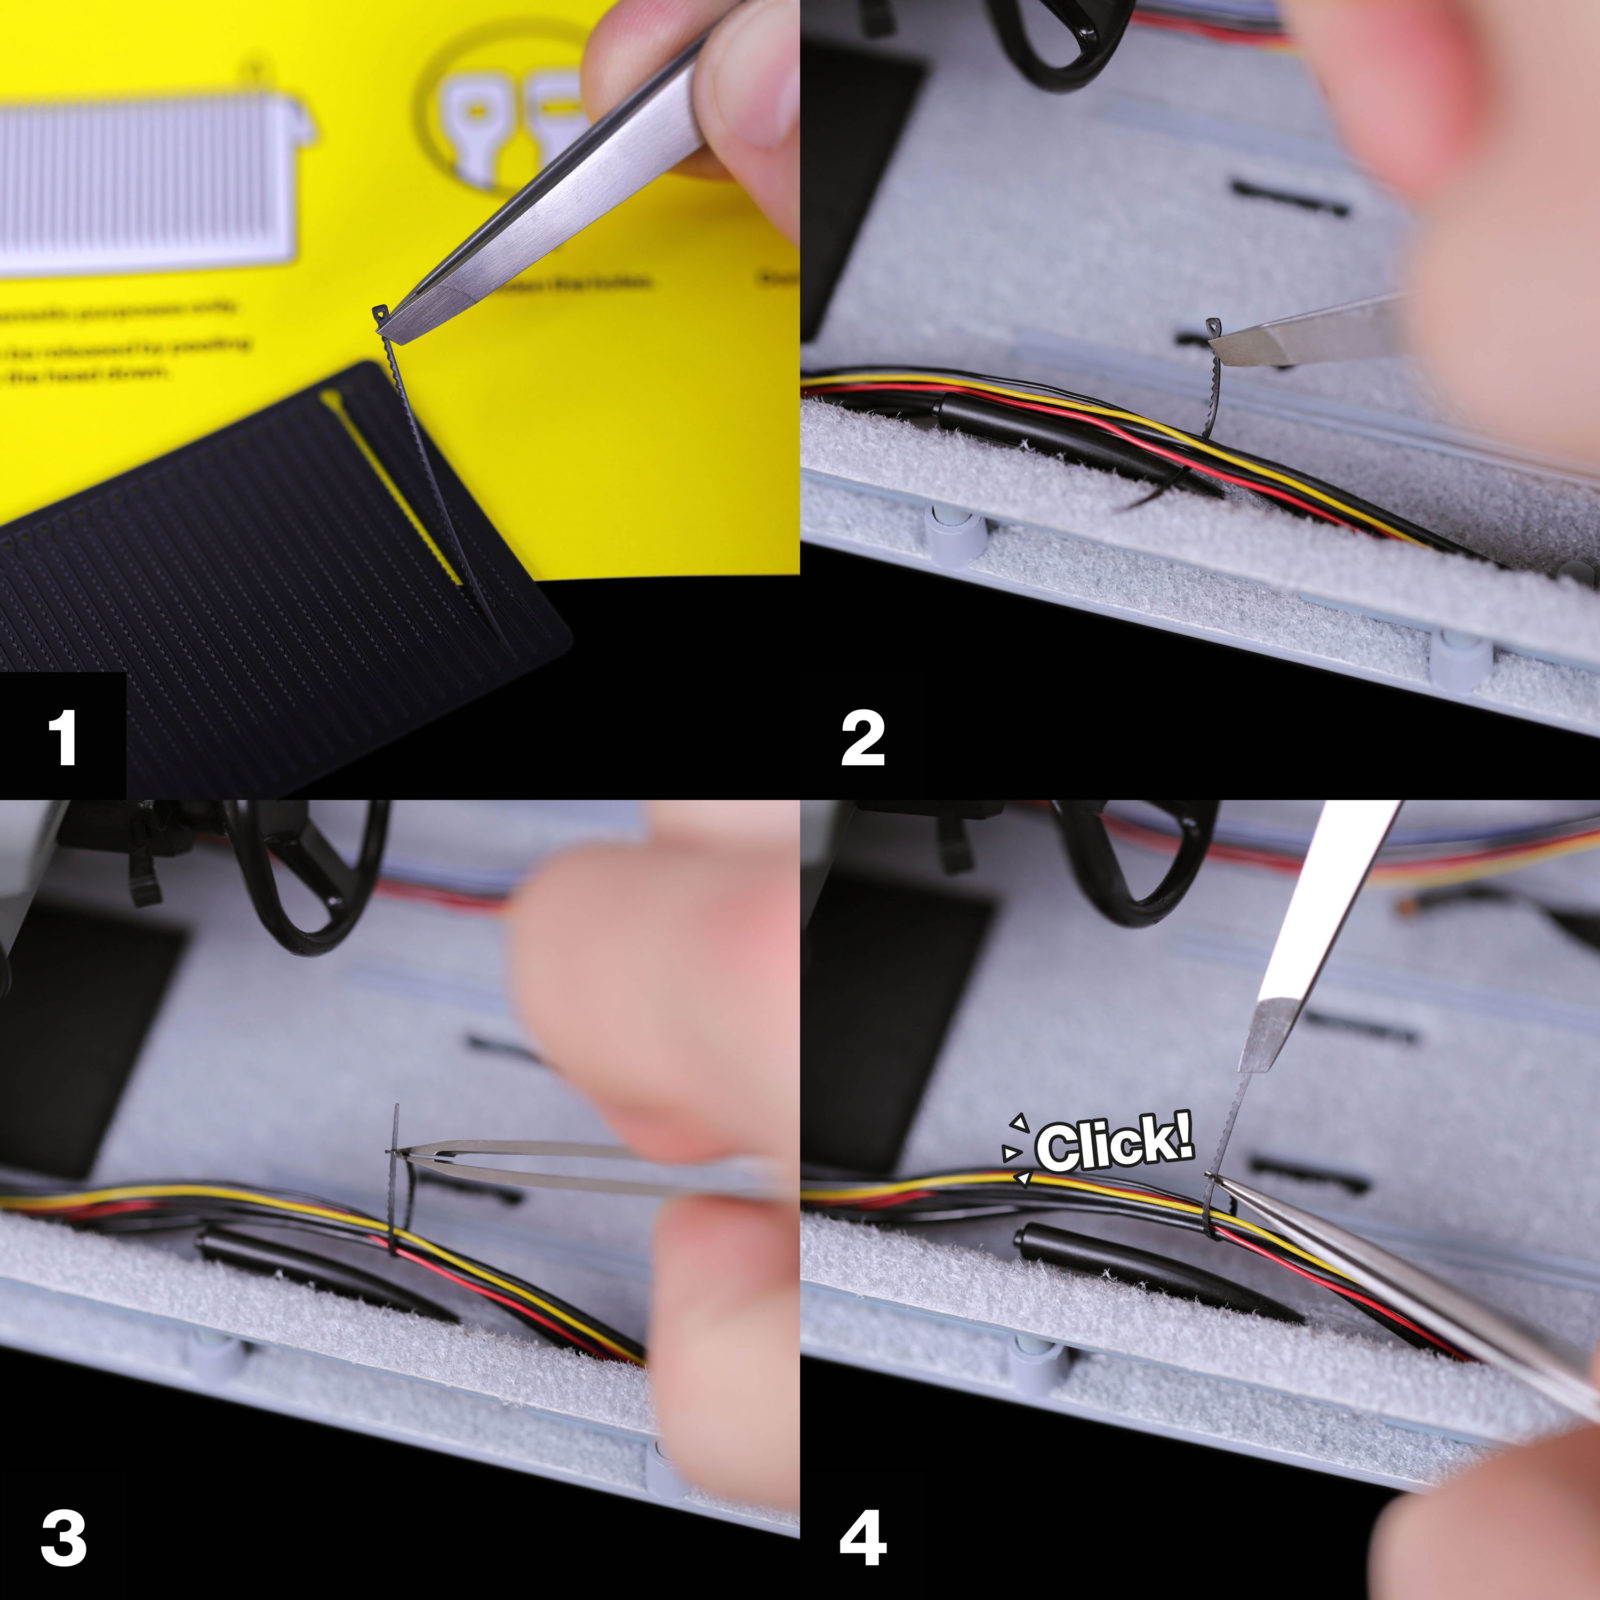 Installing Mini Cable Ties mod, Steps 1–4